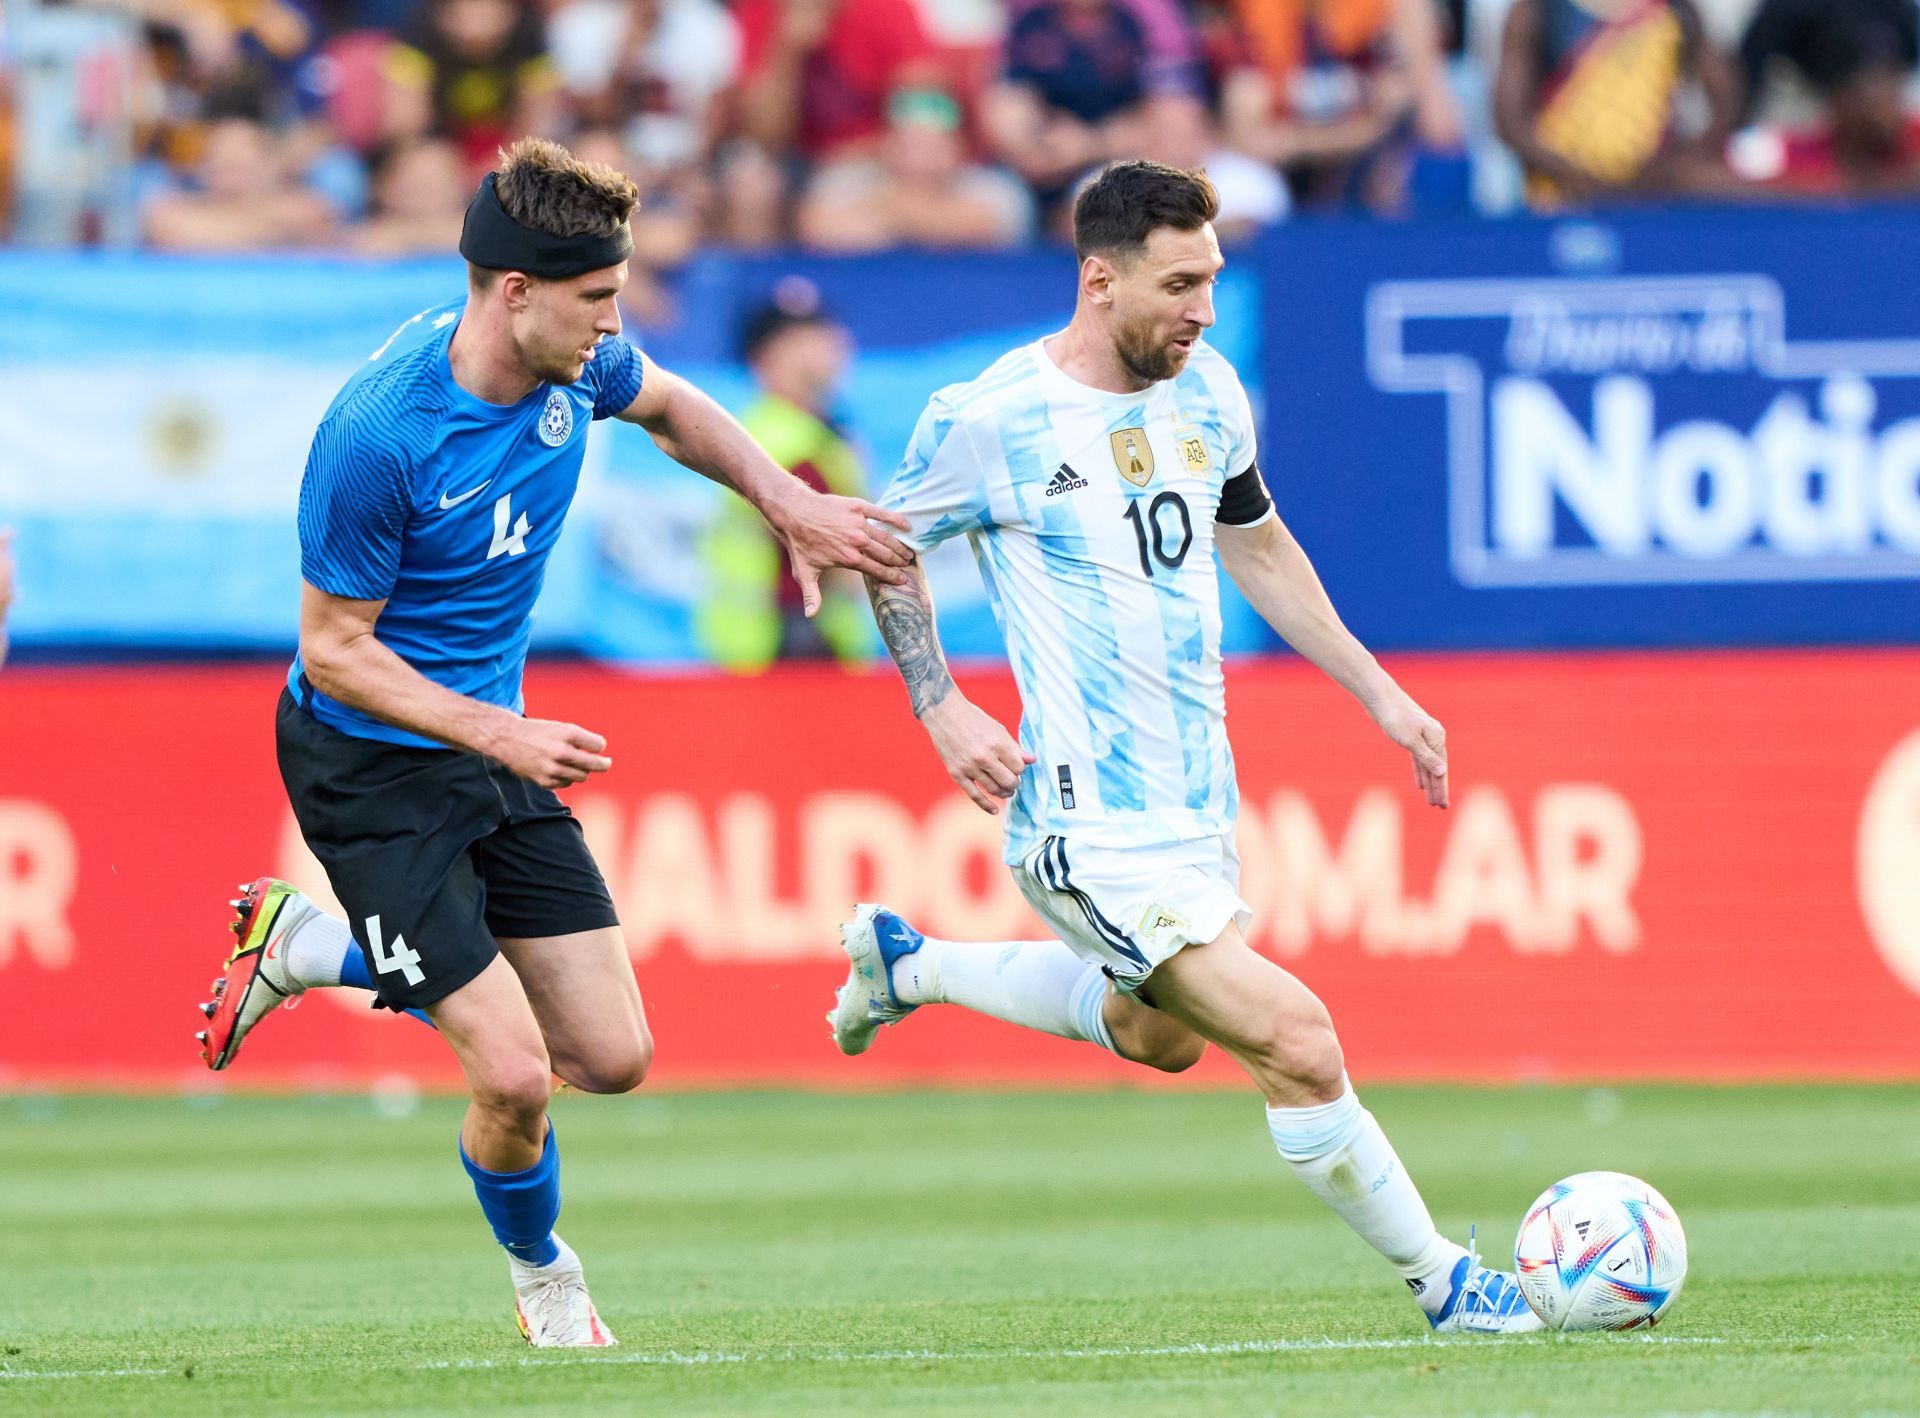 Lionel Messi will be one of the players to watch at the 2022 FIFA World Cup